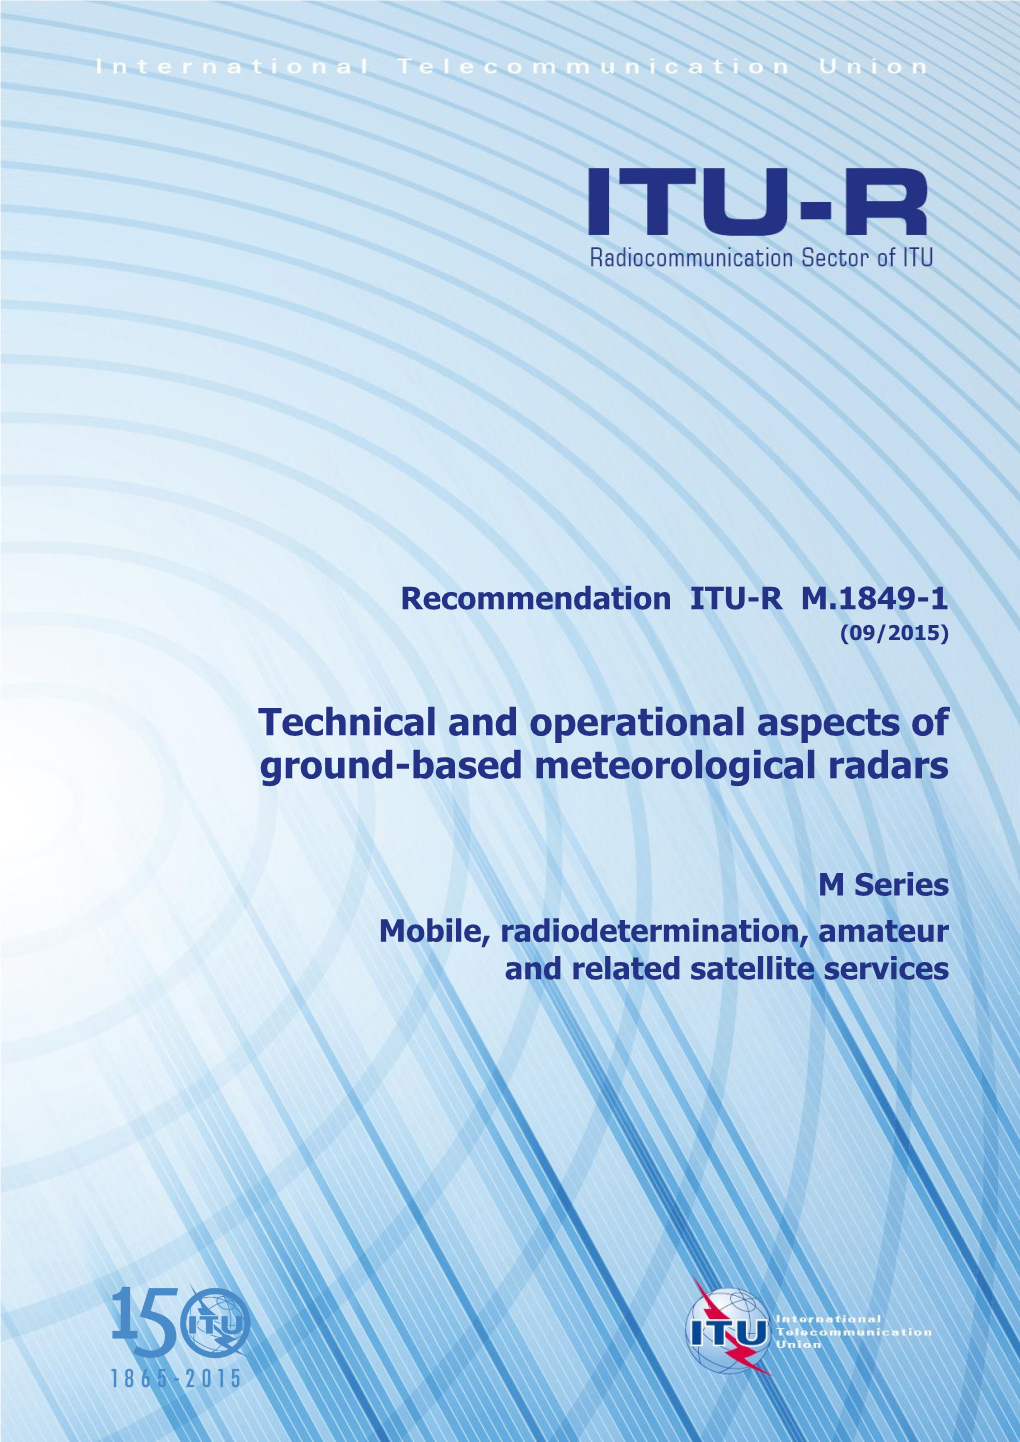 Technical and Operational Aspects of Ground-Based Meteorological Radars